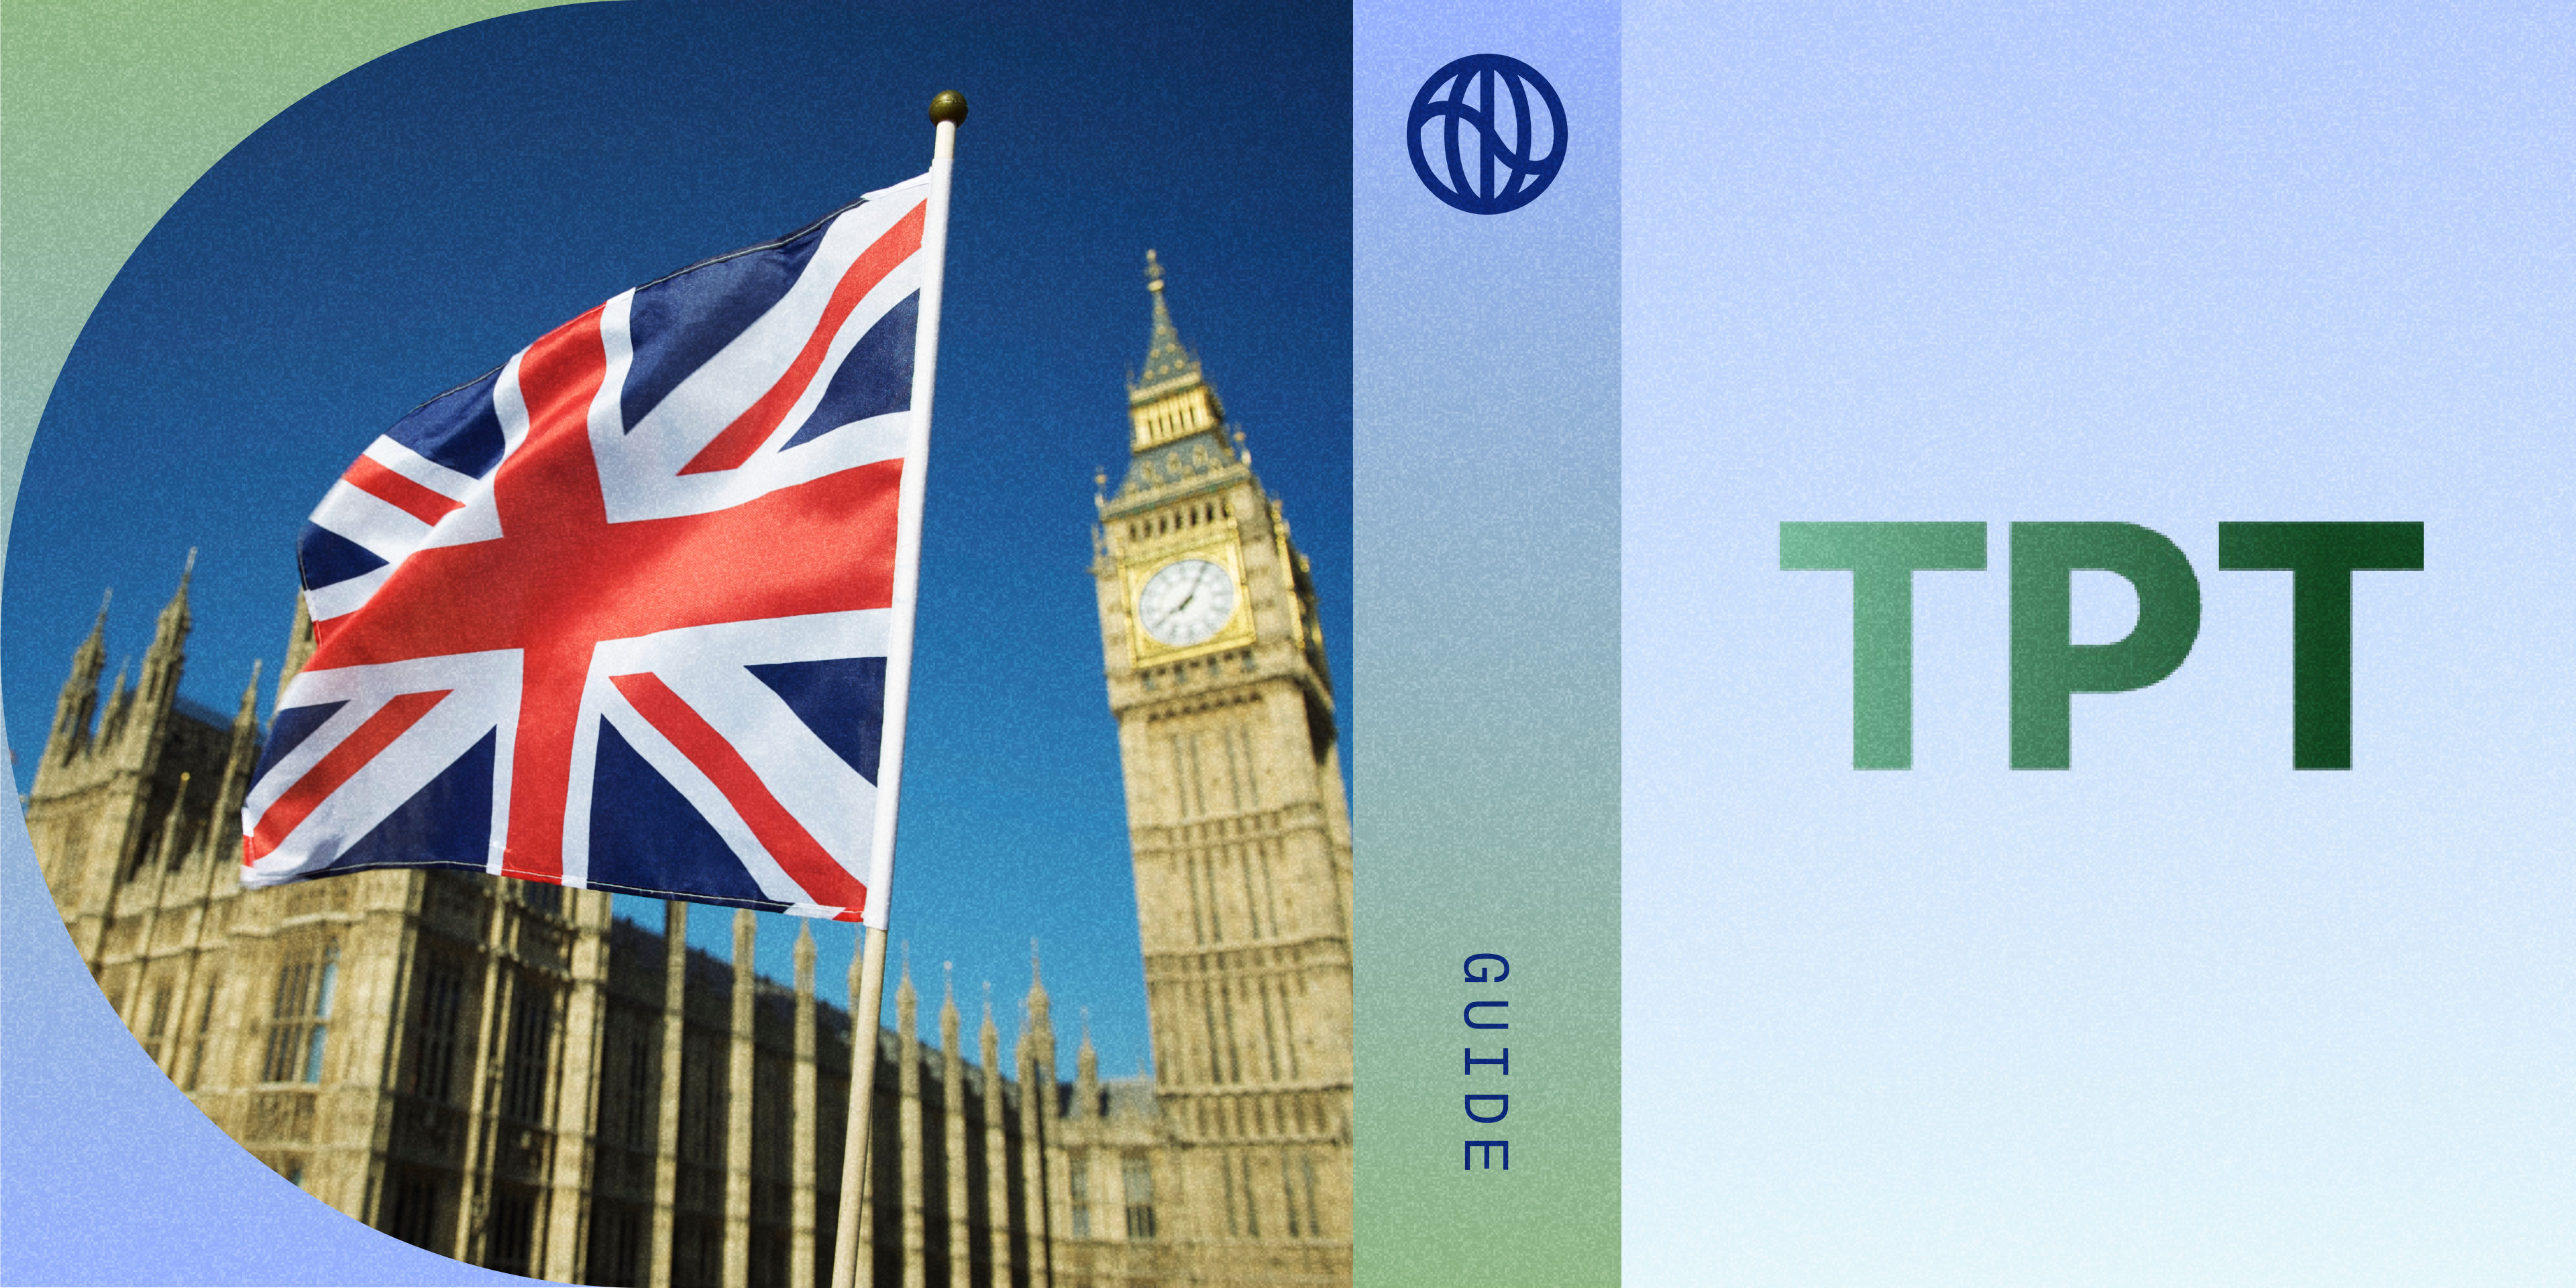 Photo of UK flag on the left and TPT logo on the right